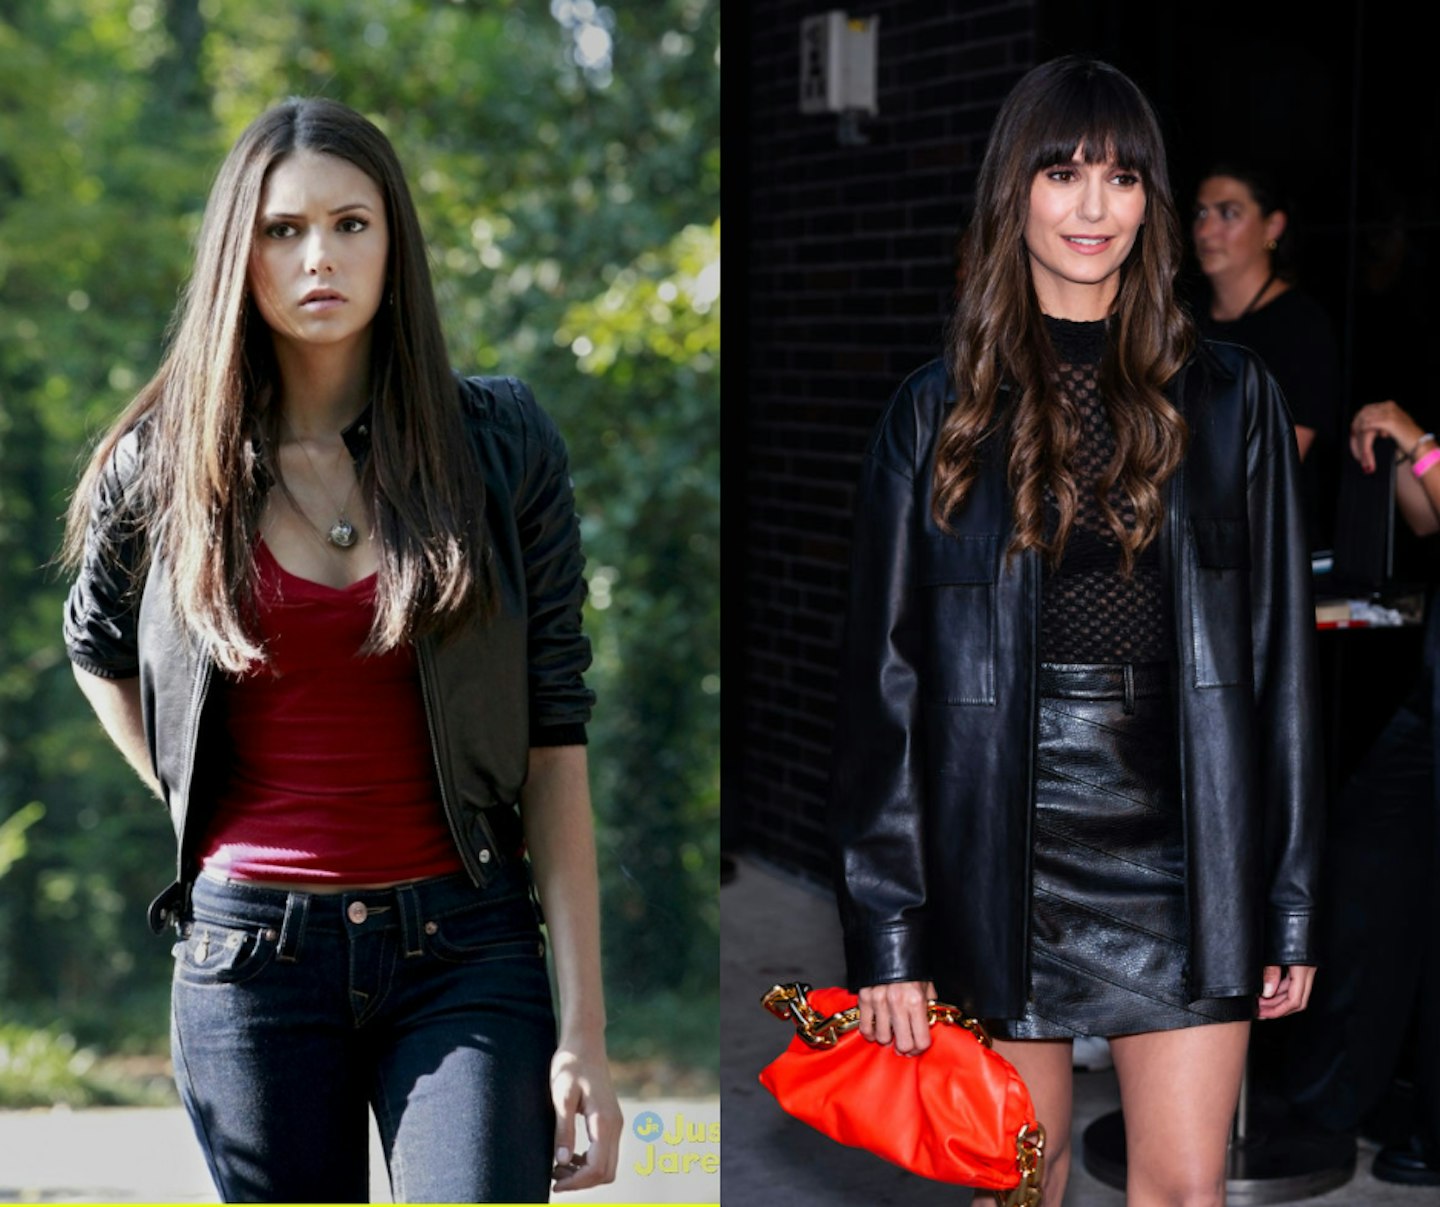 Nina then and now